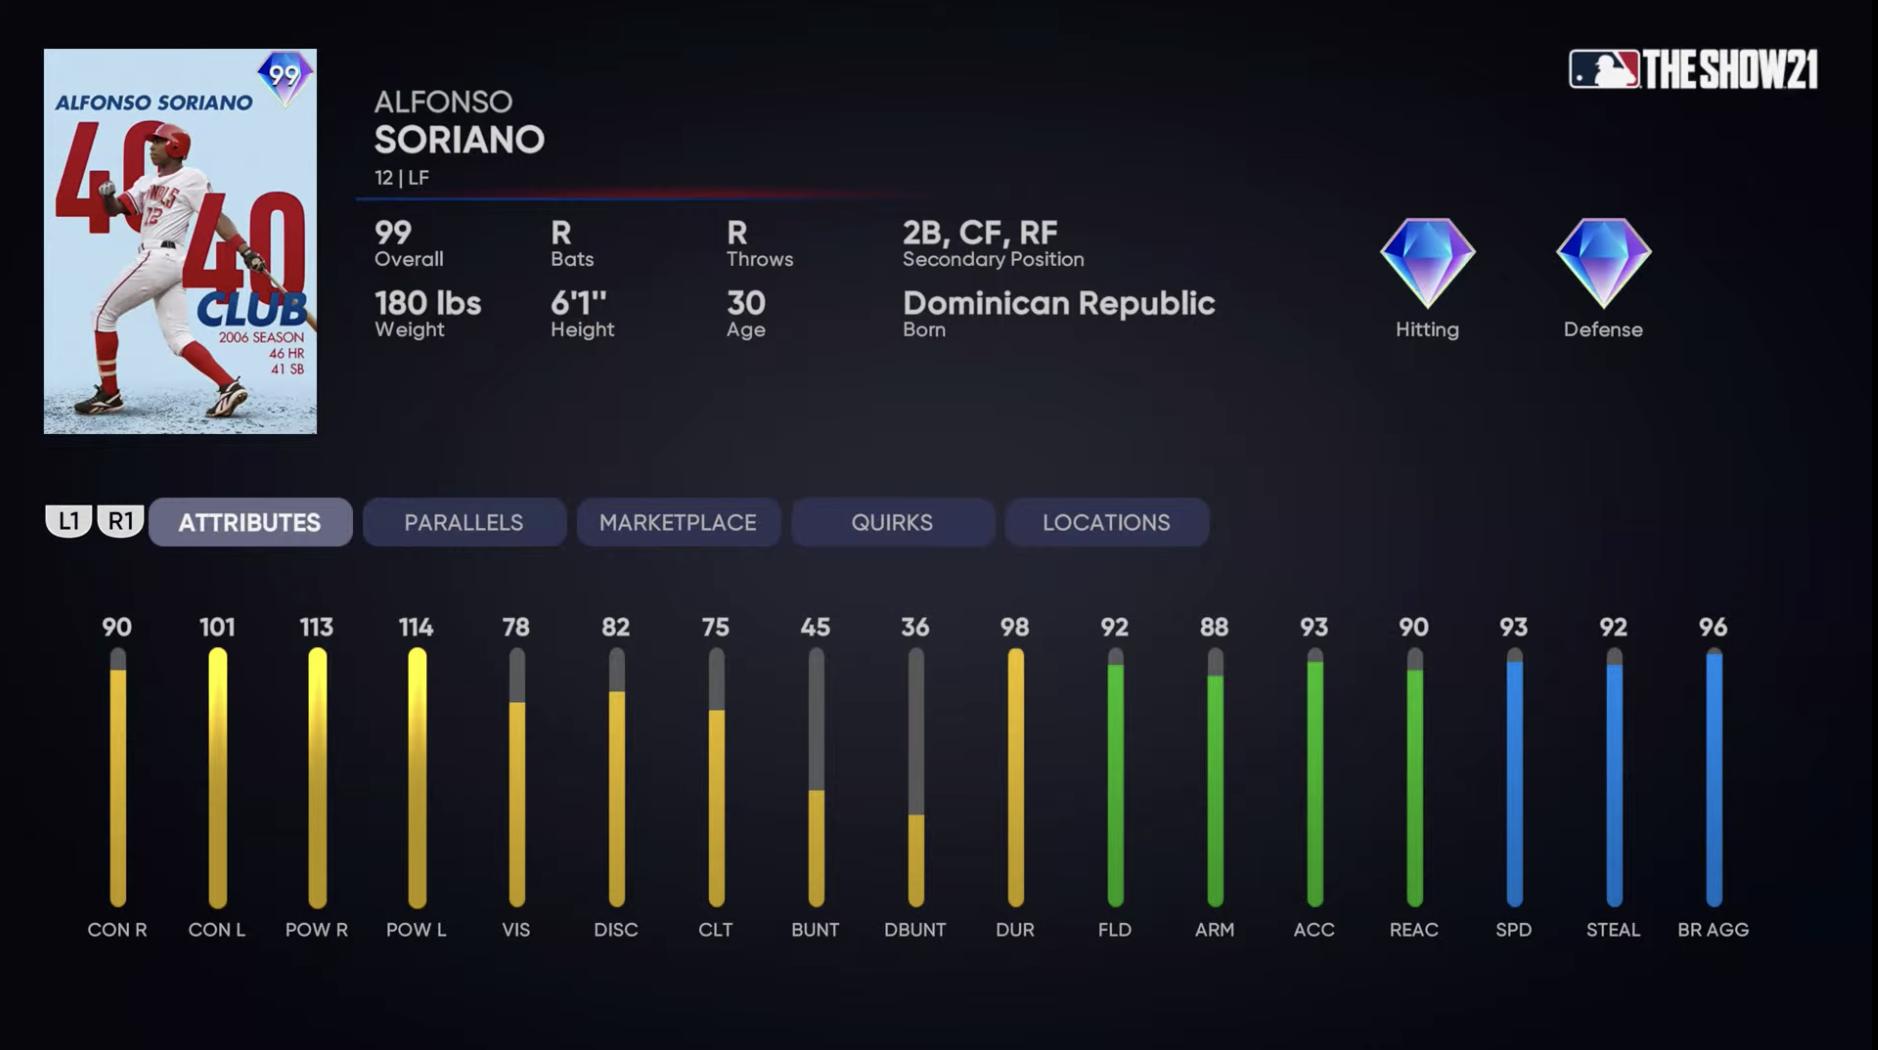 Diamond Dynasty In MLB The Show 21 Includes New Parallel XP System